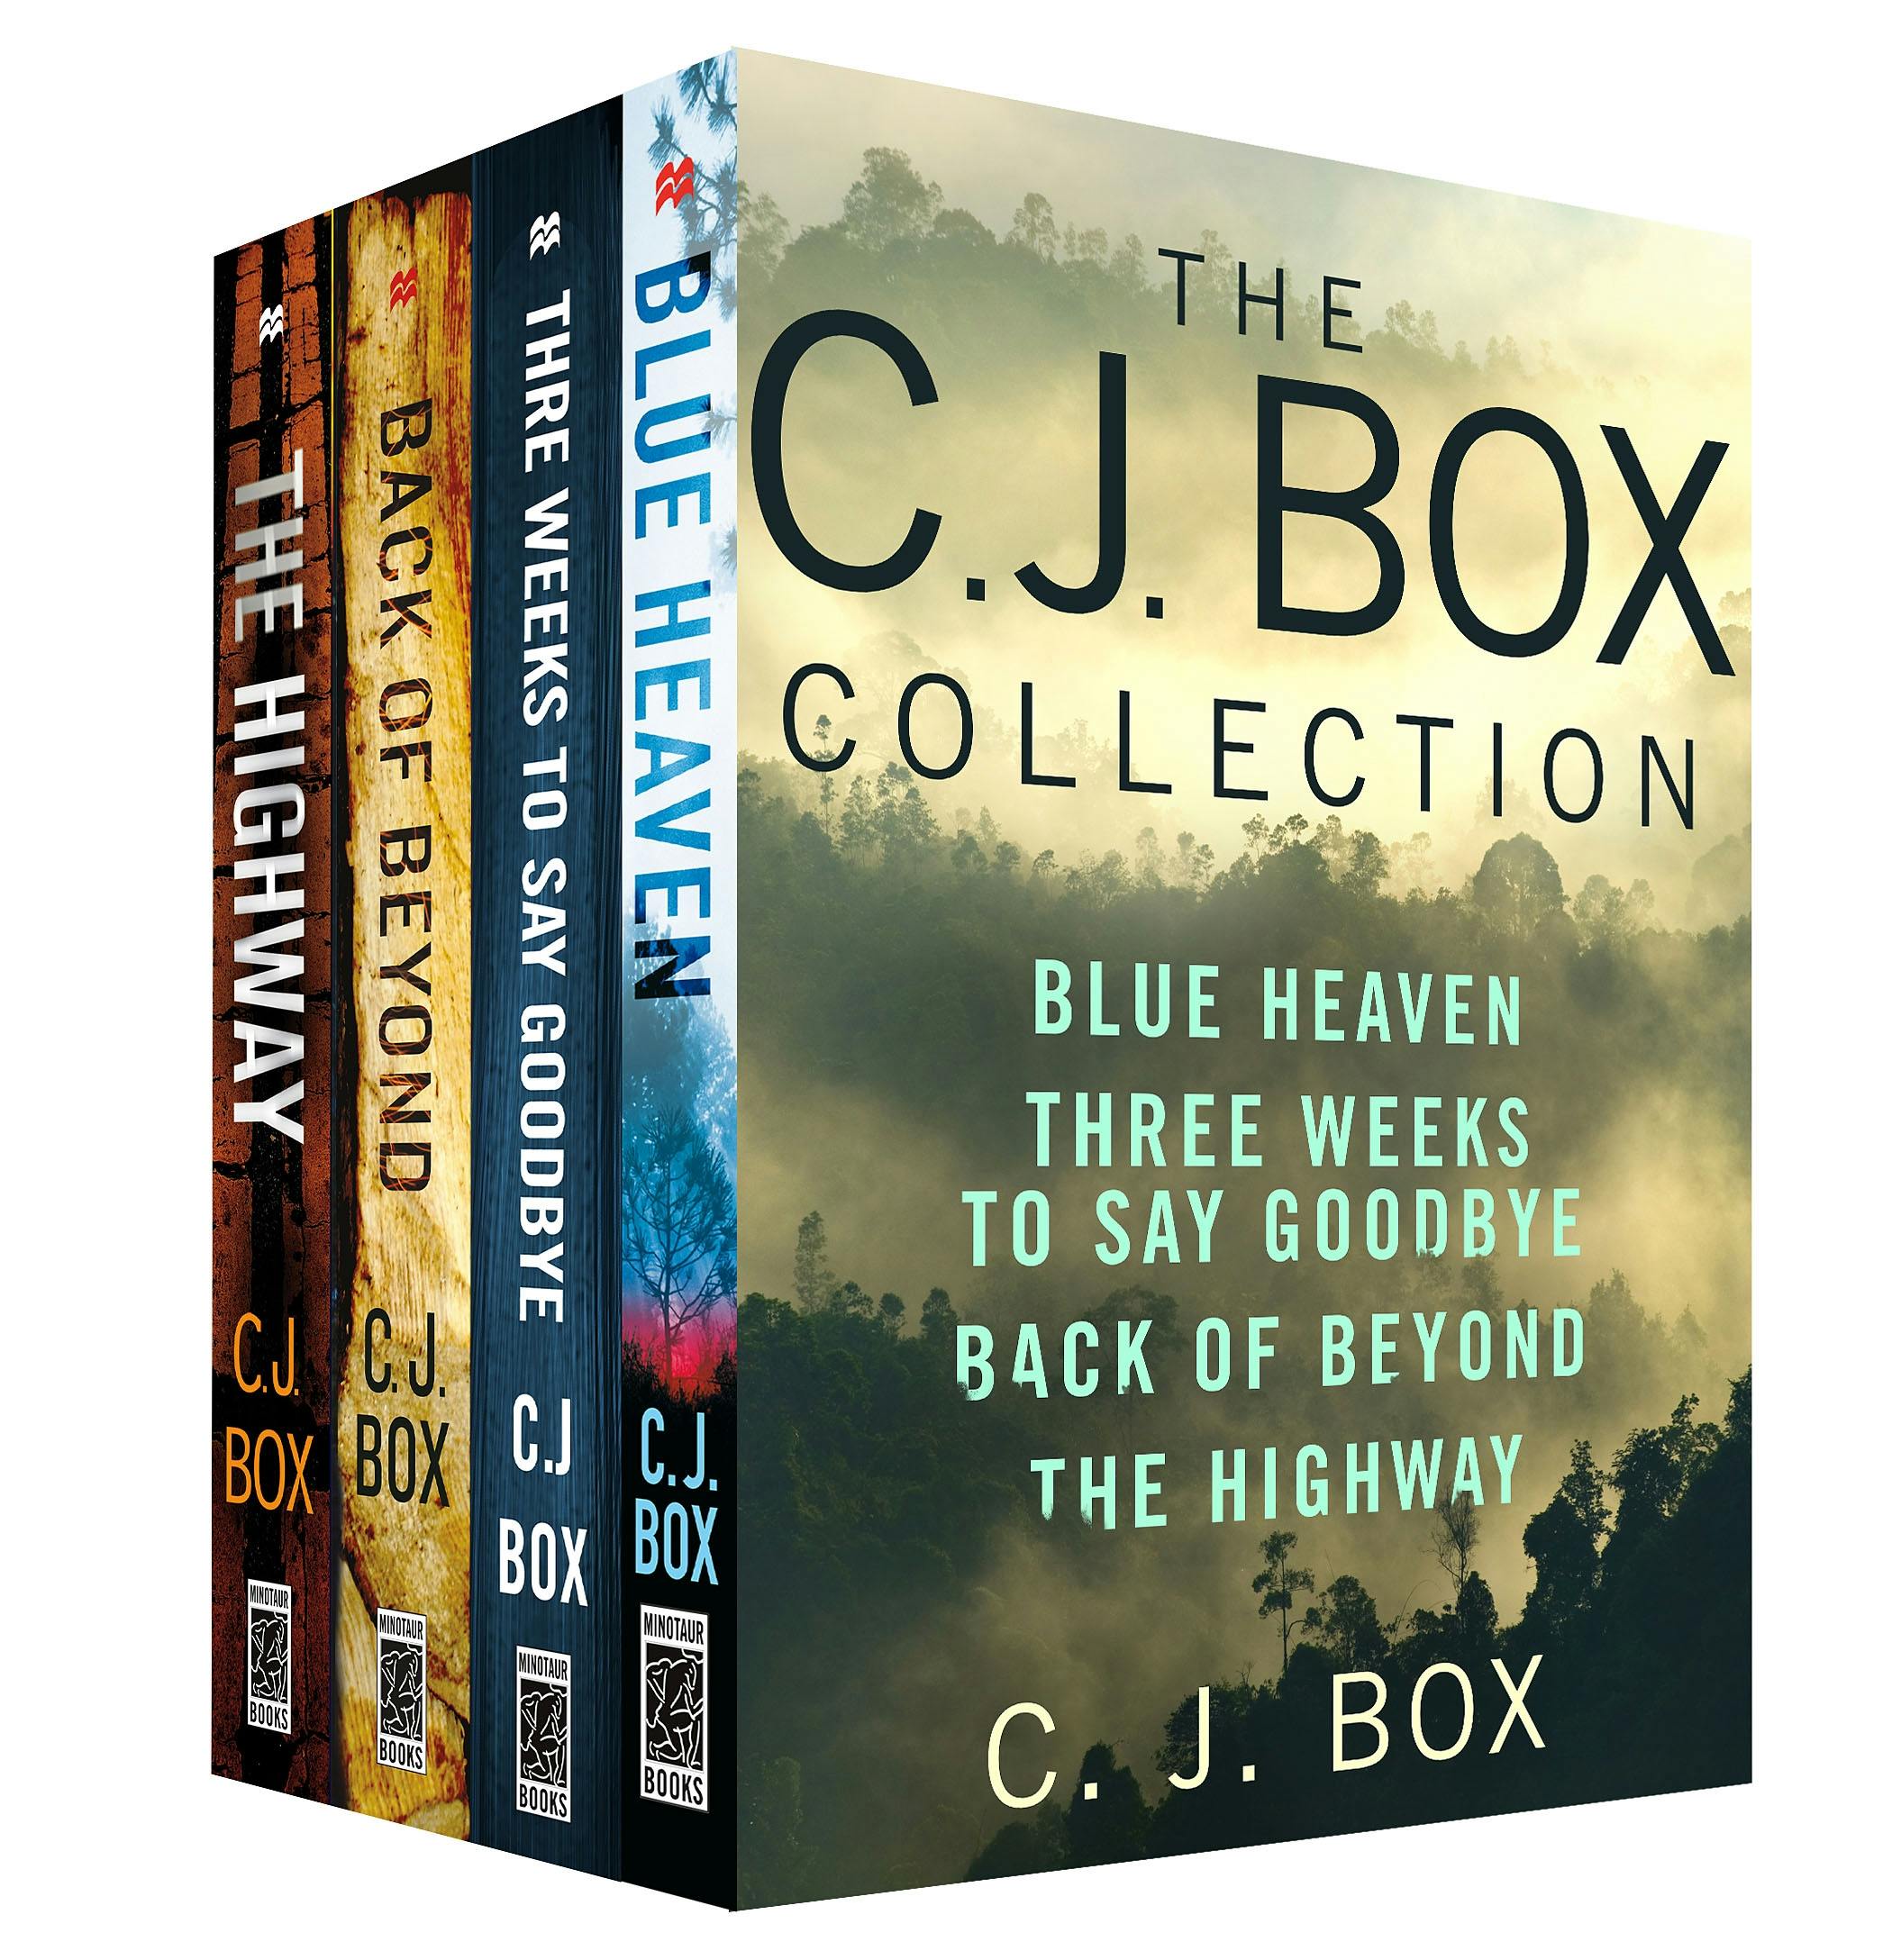 C.J. Box Hardcover Illustrated Fiction Books with Dust Jacket for